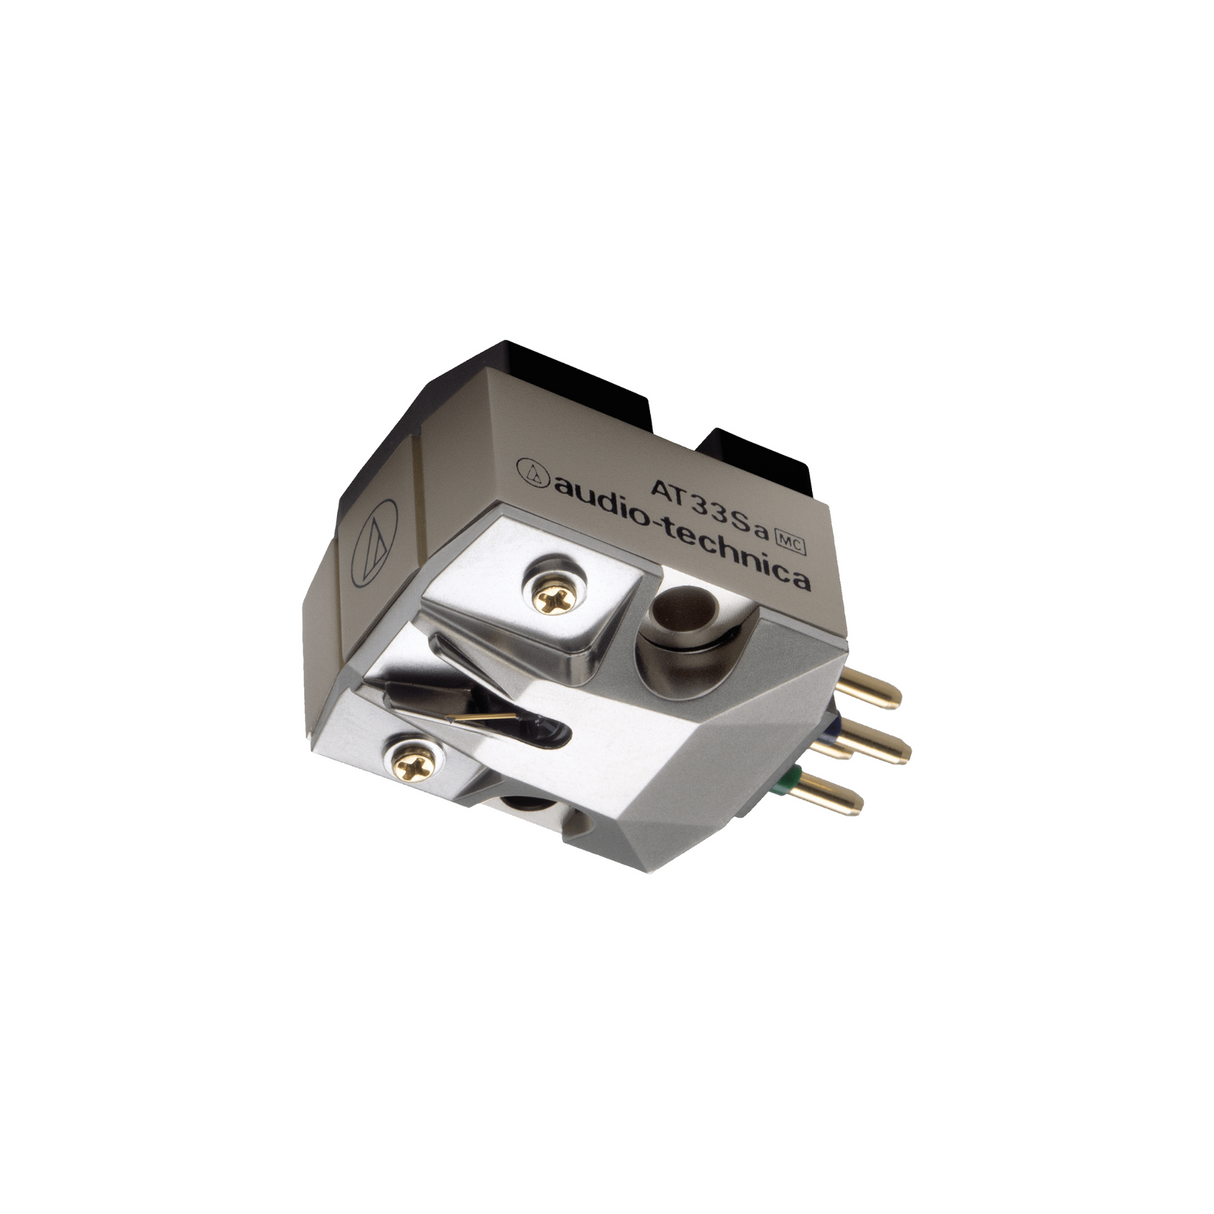 Audio Technica AT33SA Moving Coil Cartridge